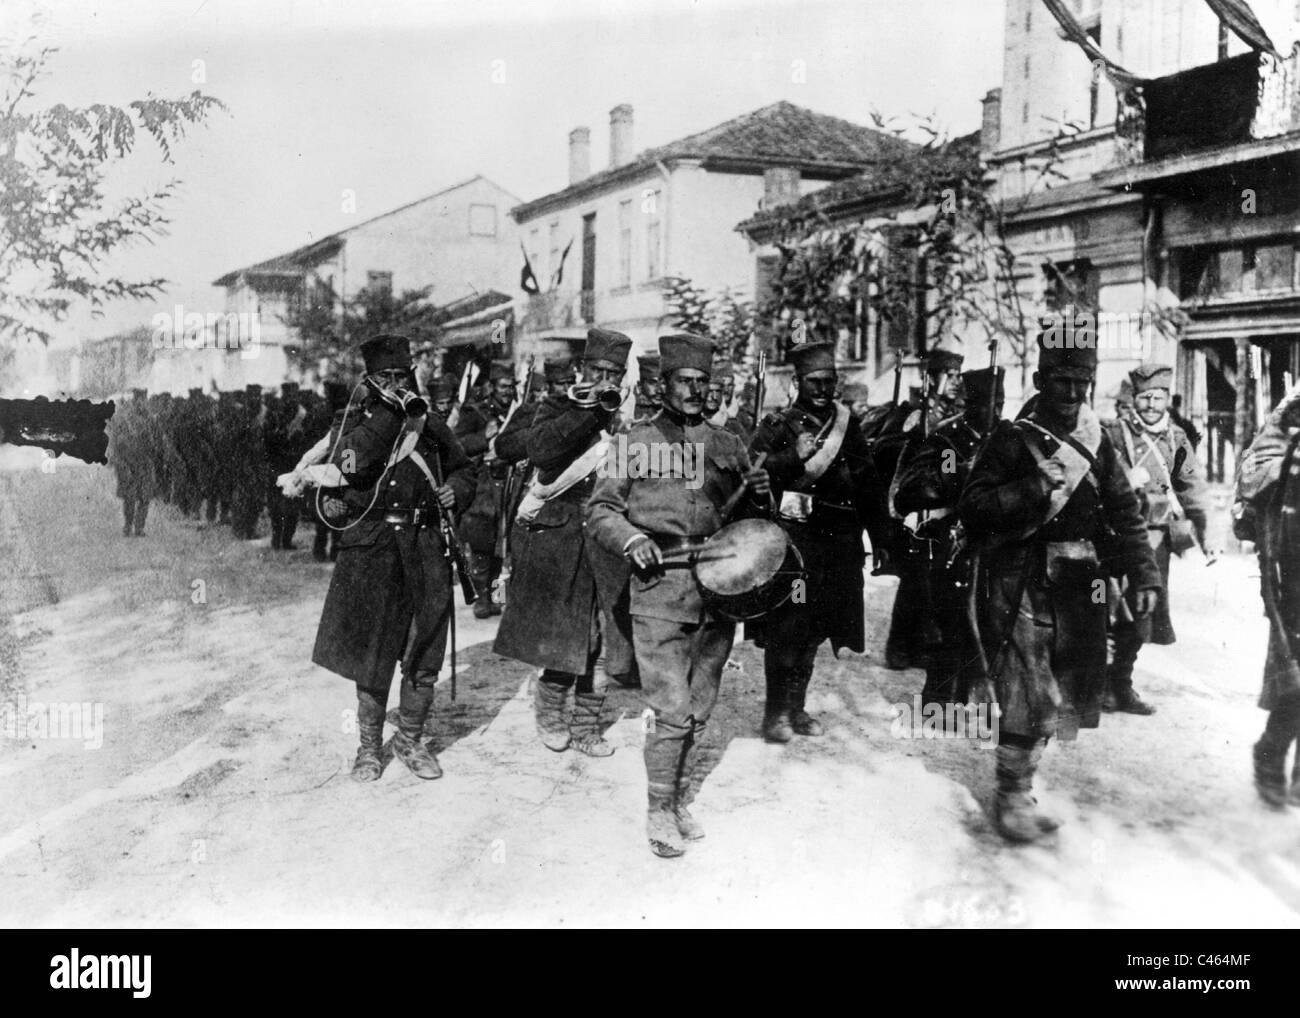 Le truppe serbe marching, 1914 Foto Stock